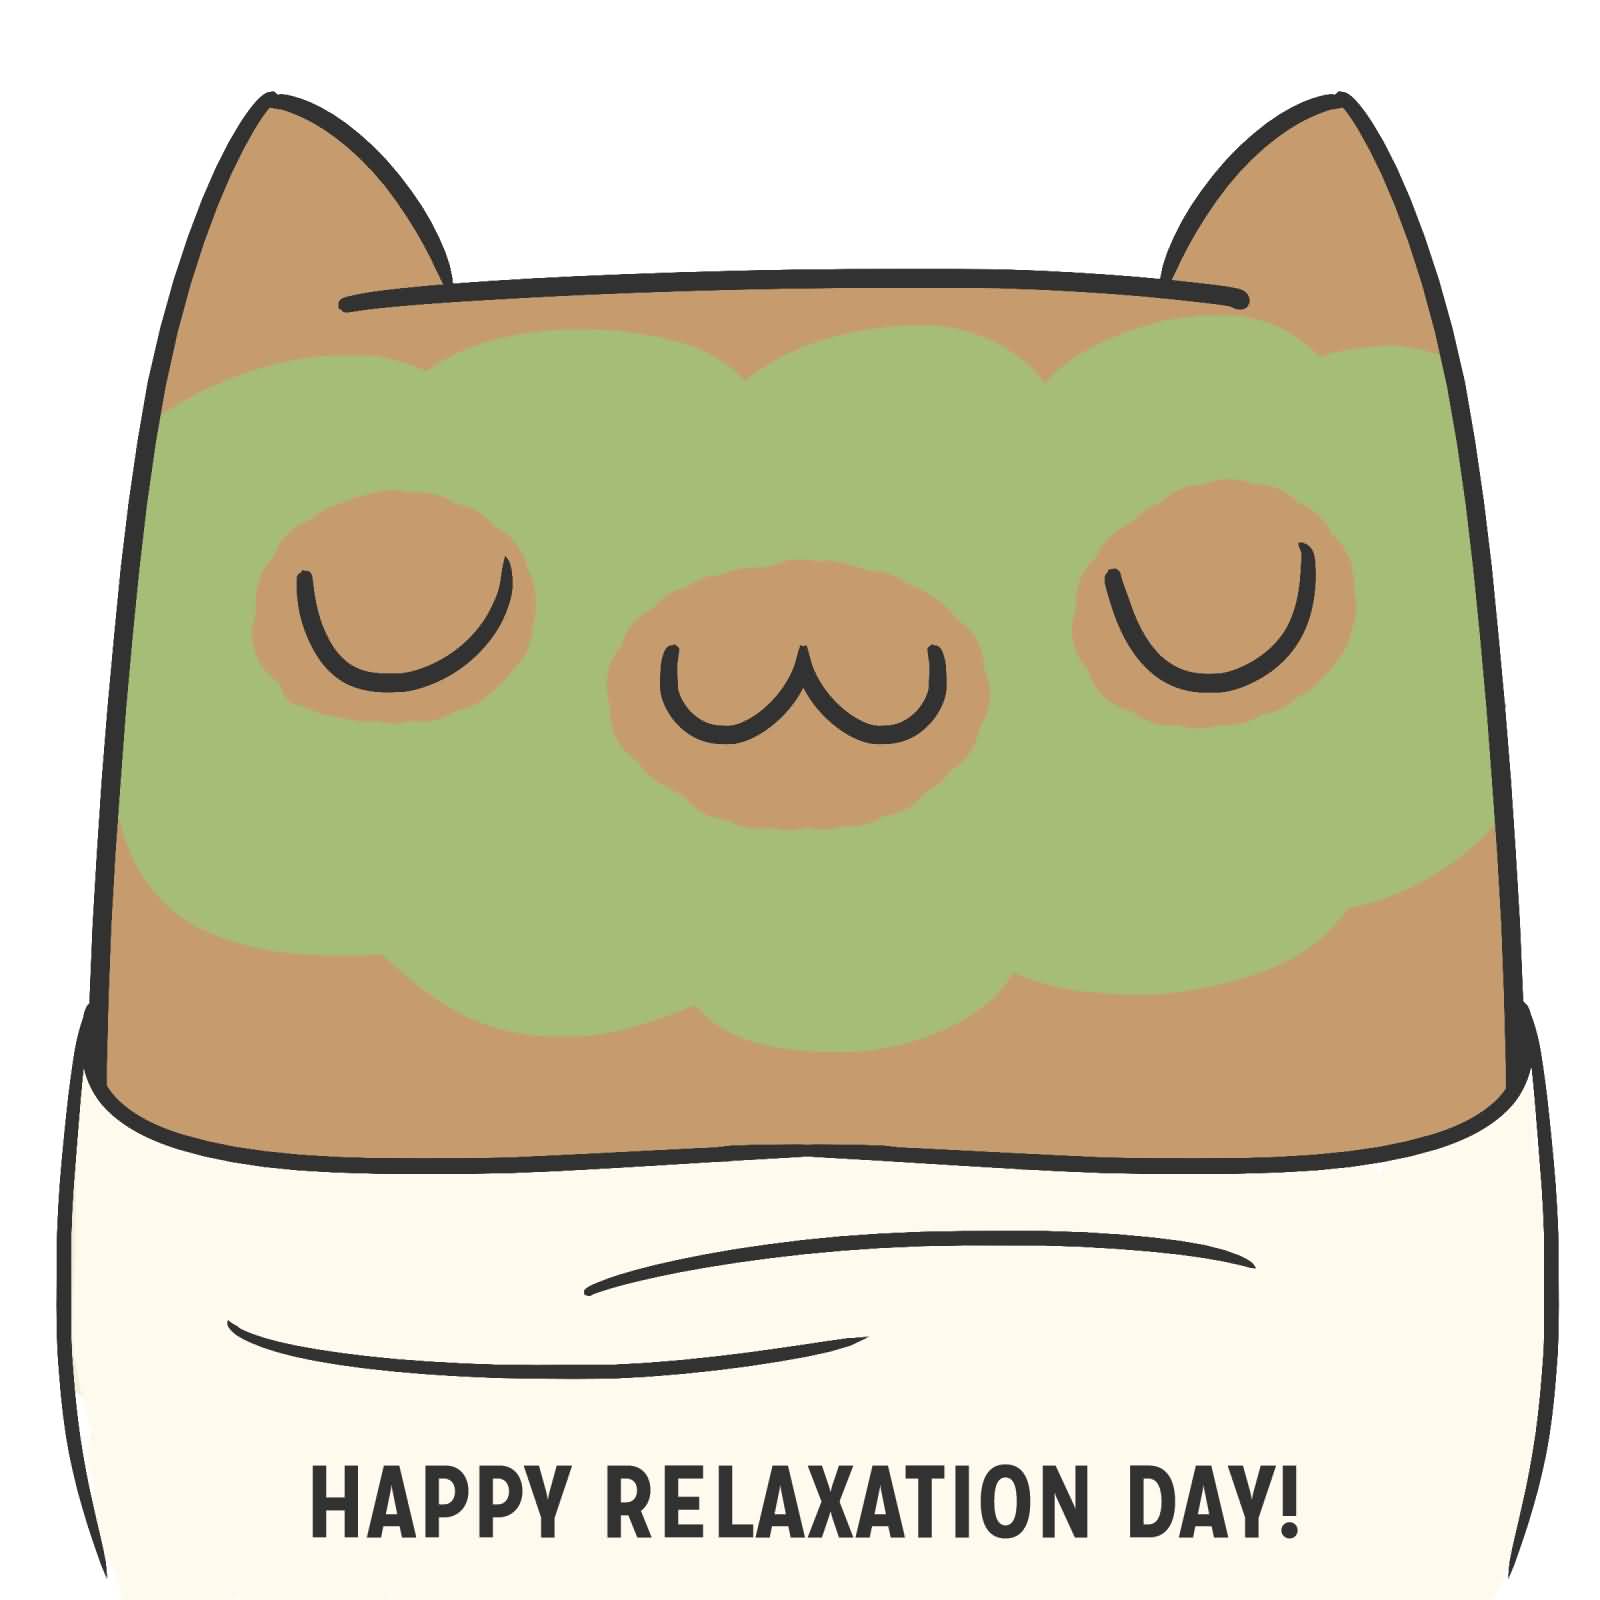 25 Happy Relaxation Day 2016 Wish Pictures And Photos